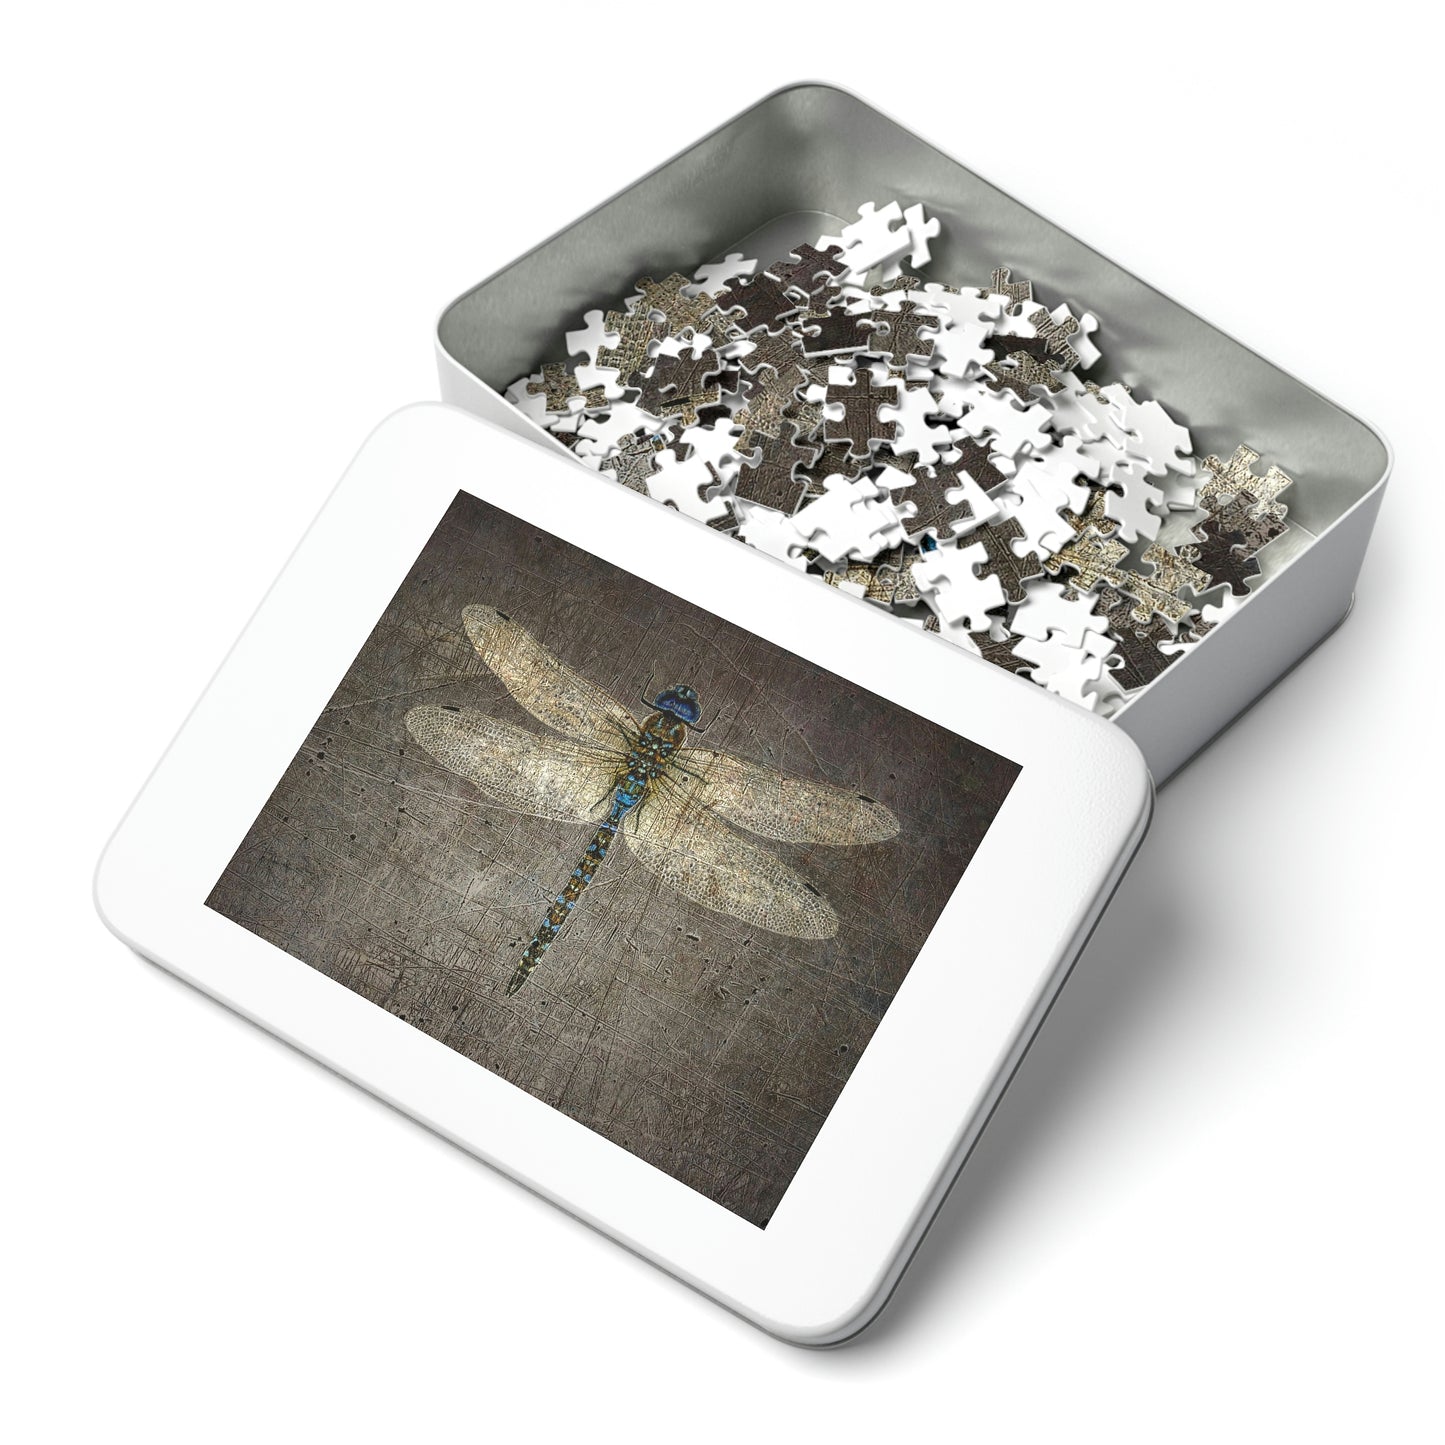 Dragonfly on Distressed Granite Background Puzzle 250 pieces in tin